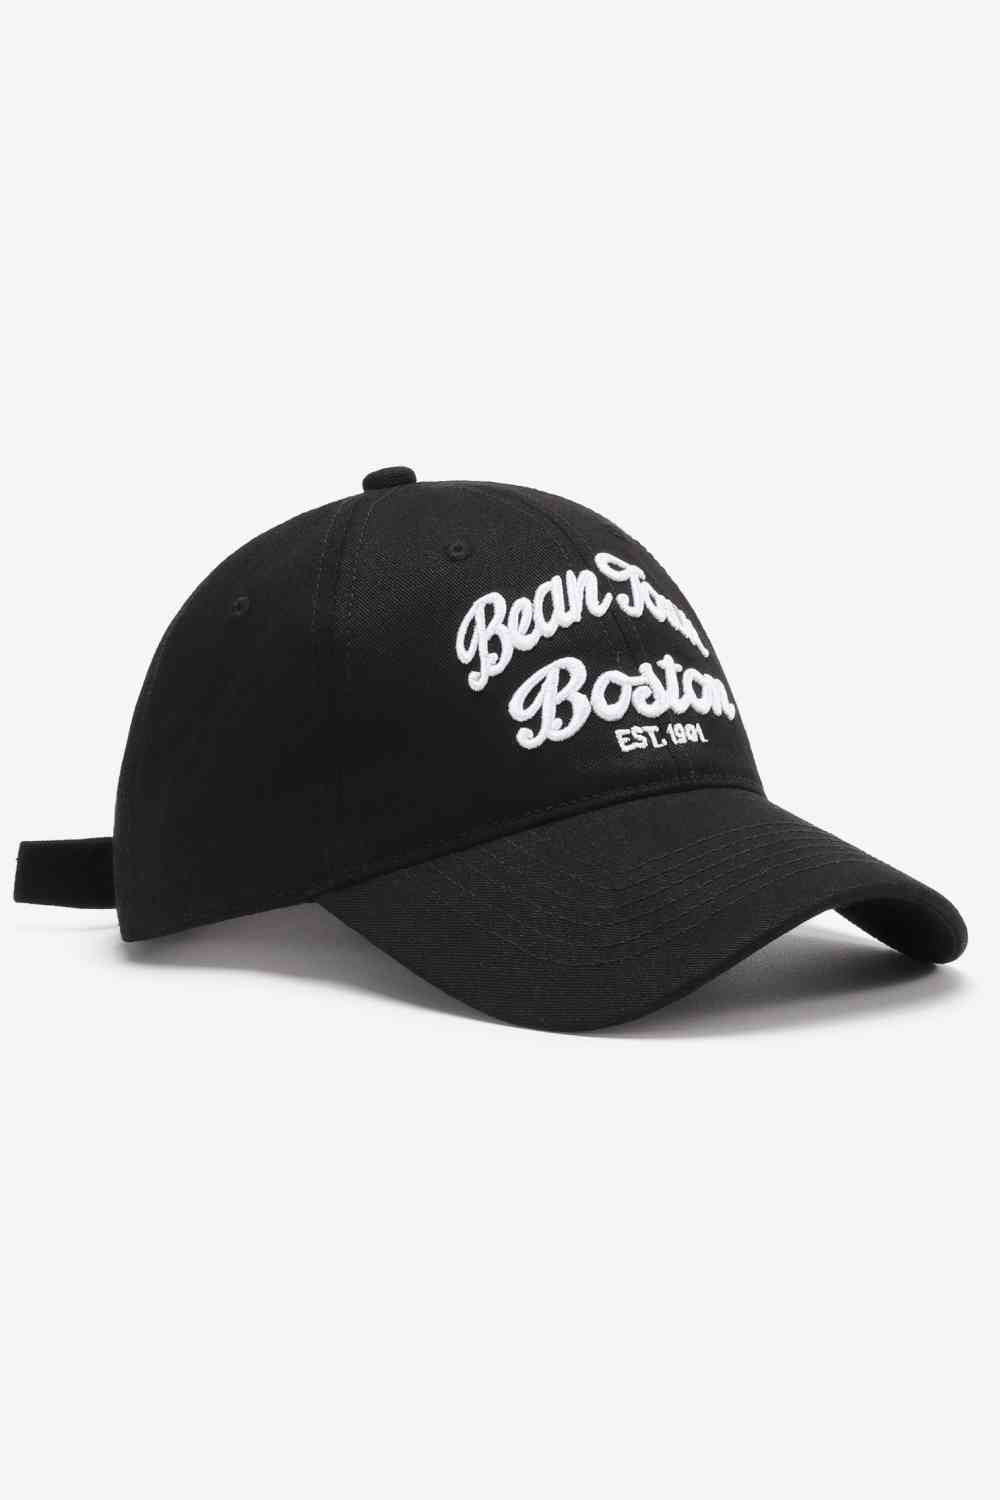 Embroidered Graphic Adjustable Baseball Cap Black One Size